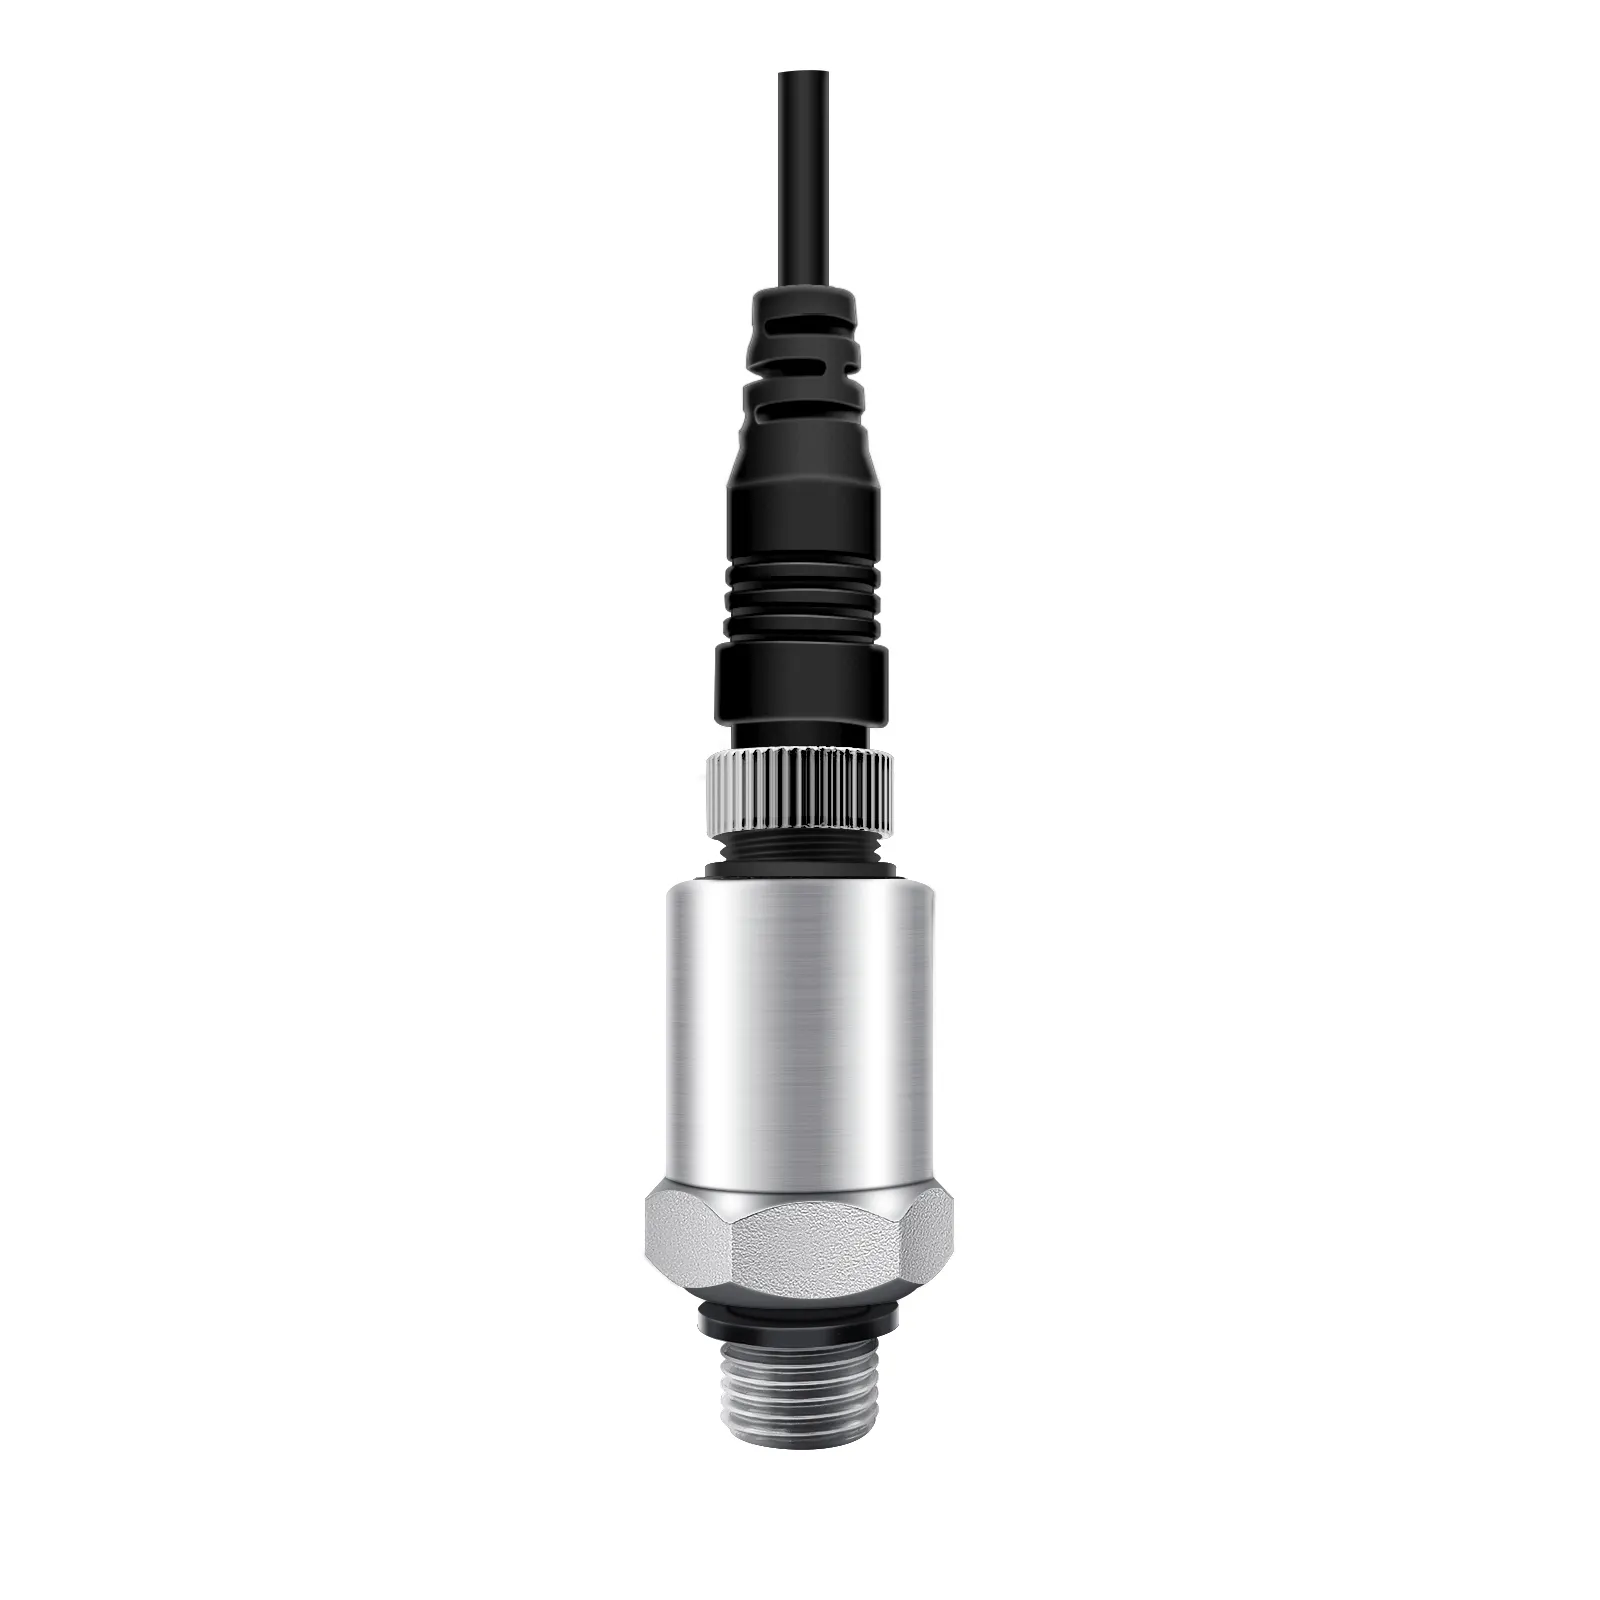 Reliable G1 2 Hygienic Pressure Transmitter with 420mA Output for Industrial Pressure Monitoring